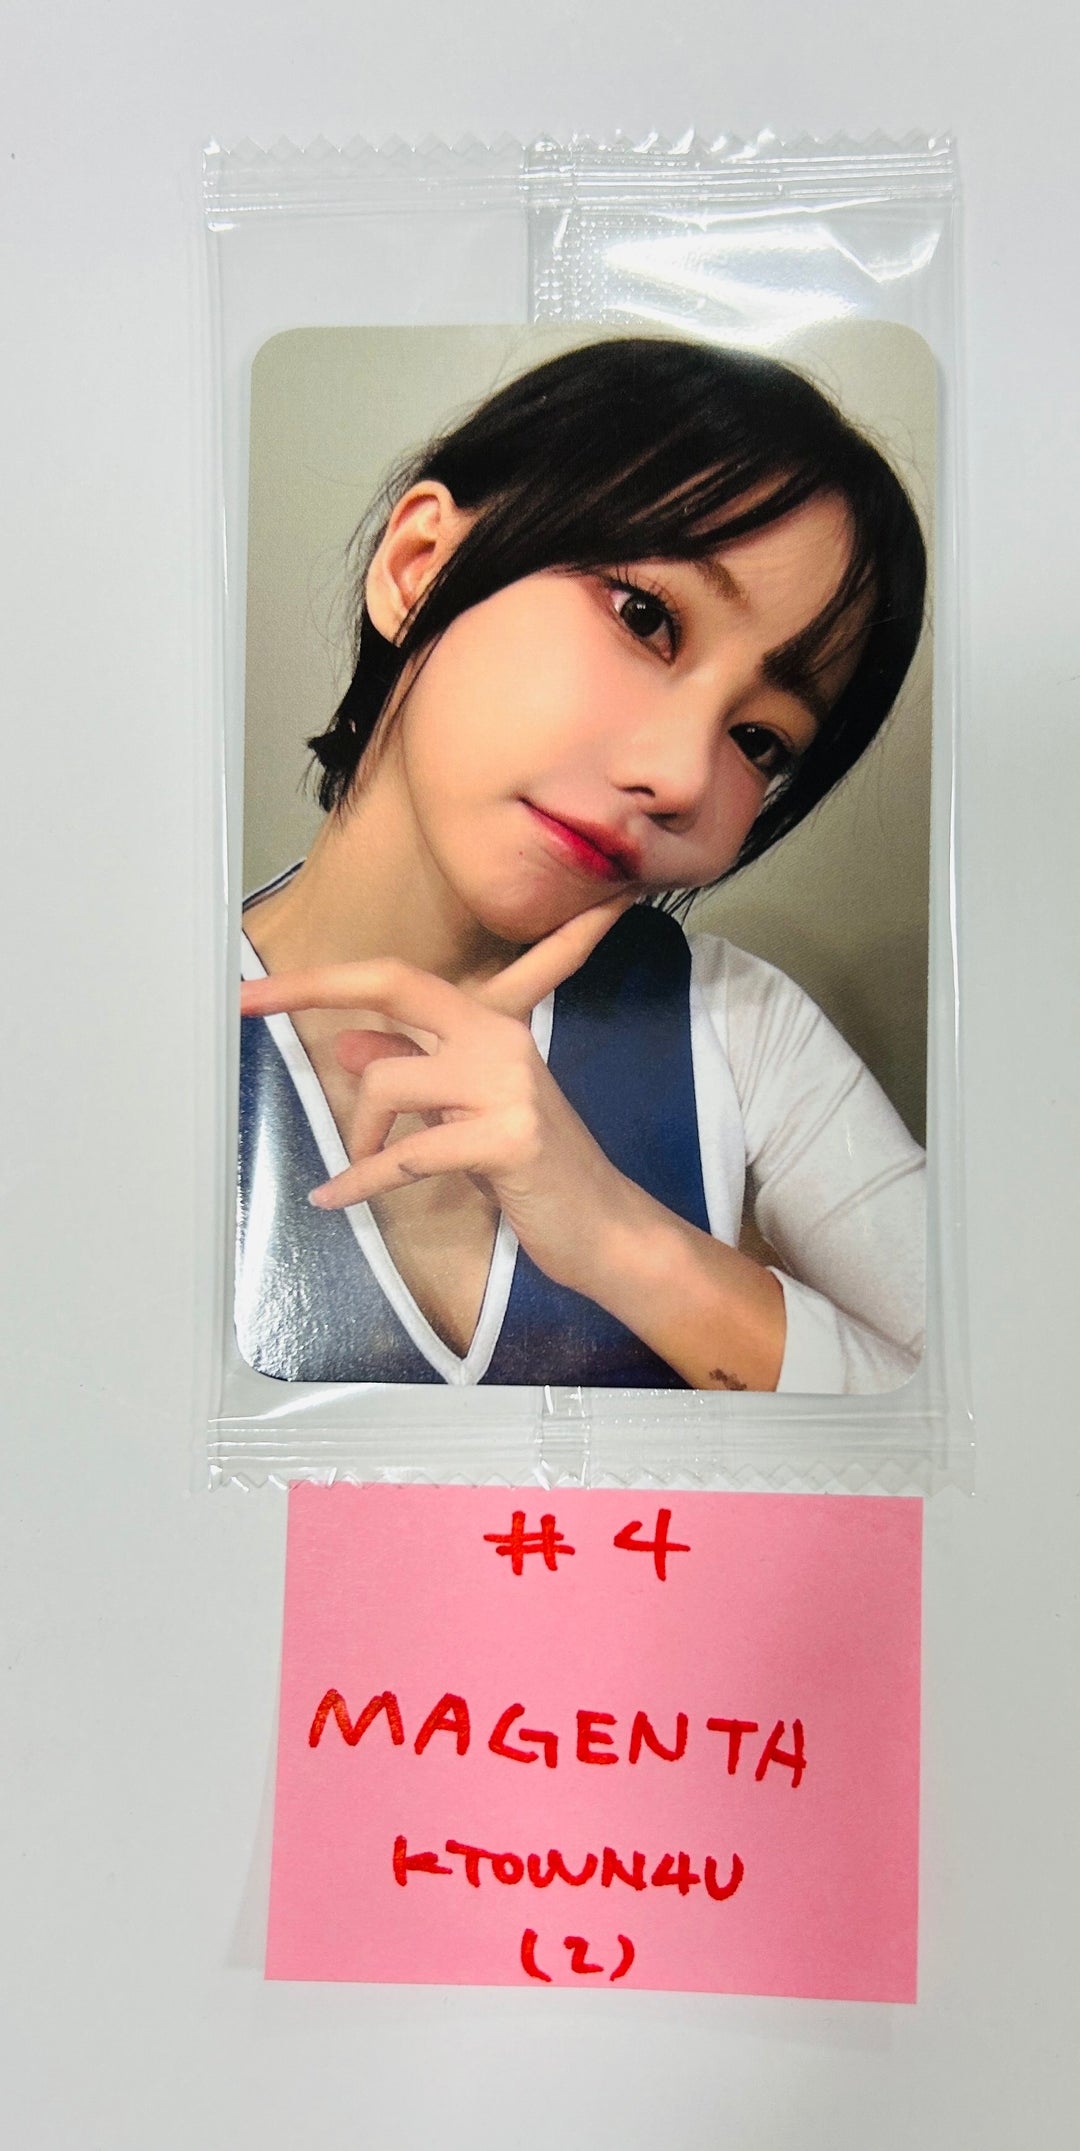 QWER "MANITO" - Ktown4U Fansign Event Photocard [24.6.7]